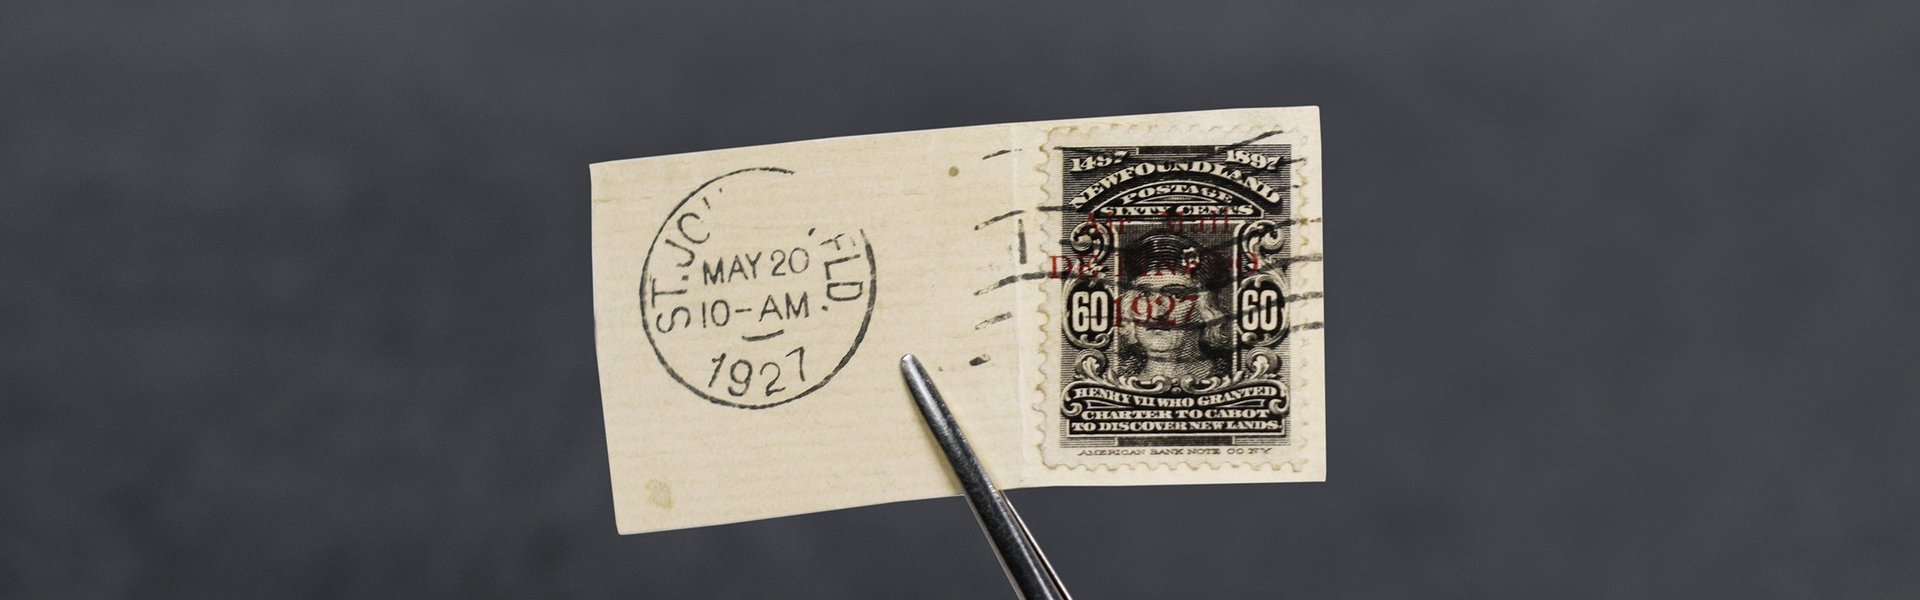 Black 60 Cent Stamp form Newfoundland on a letter piece - 1927 Airmail